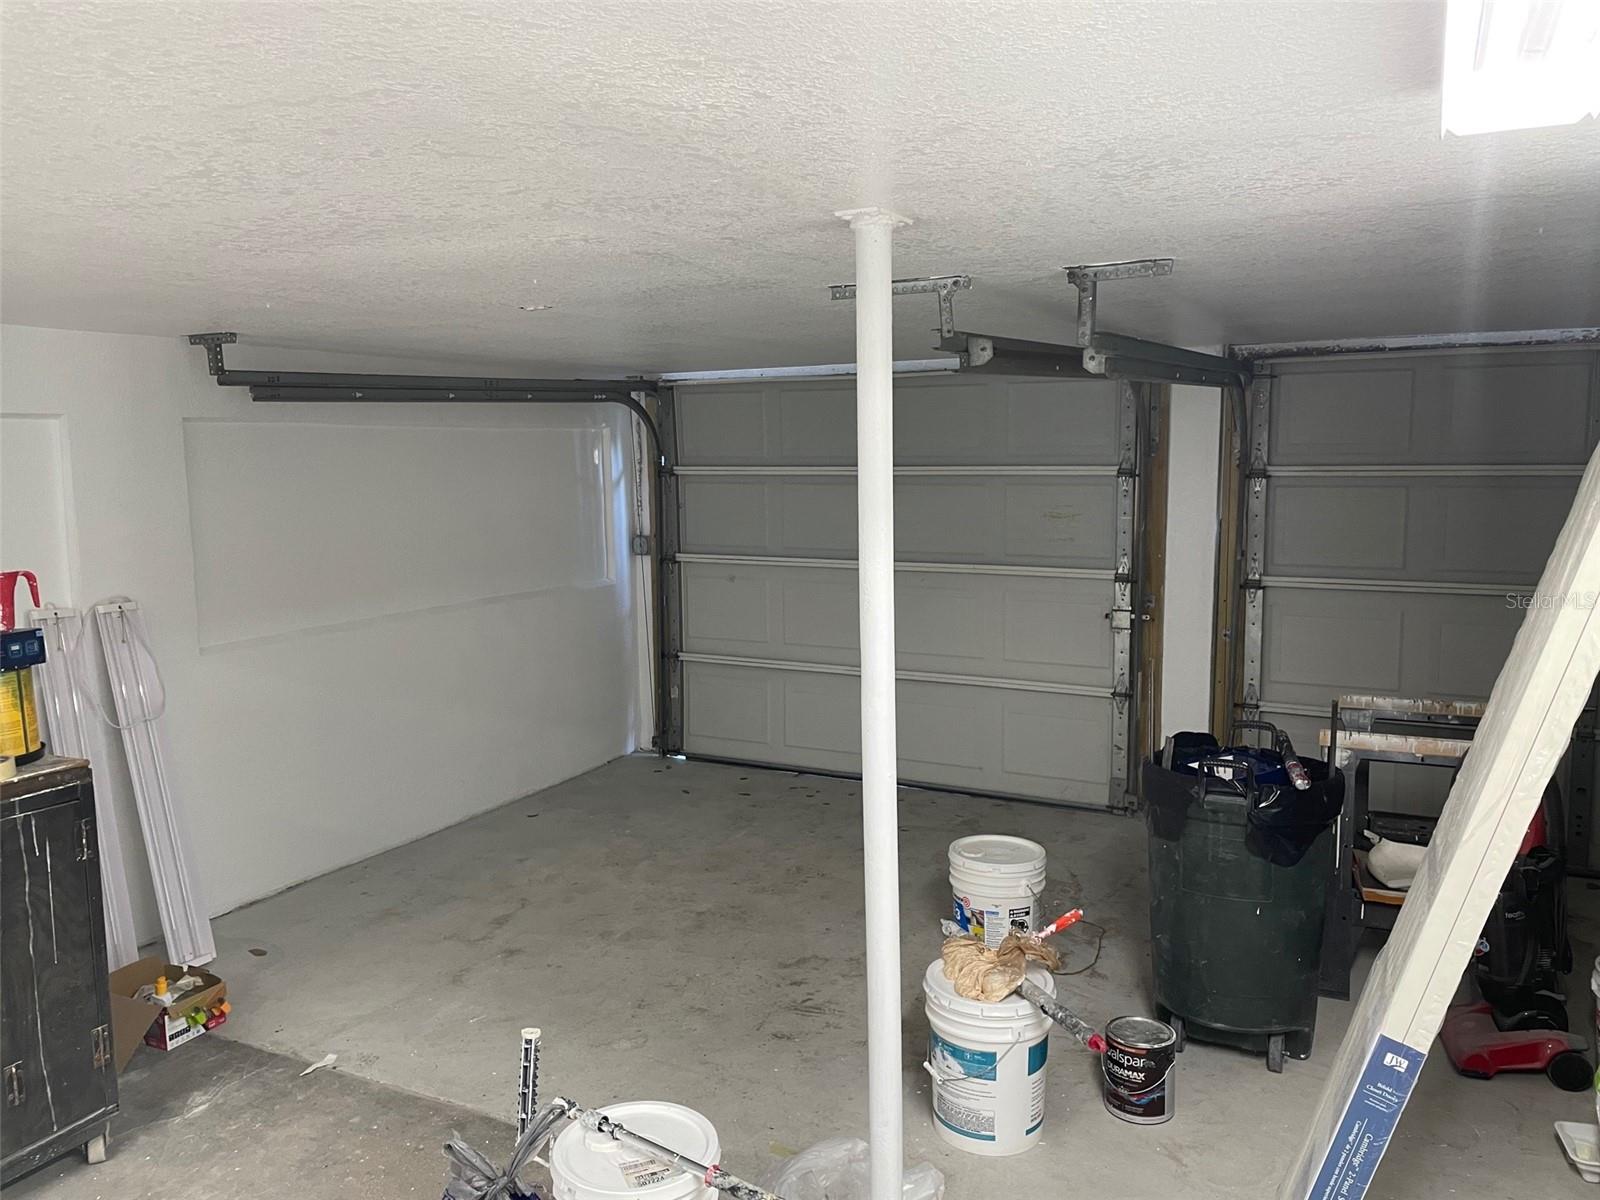 Garage with 1 full parking space and 1 half space (on right) which would fit a Smart Car or golf cart.